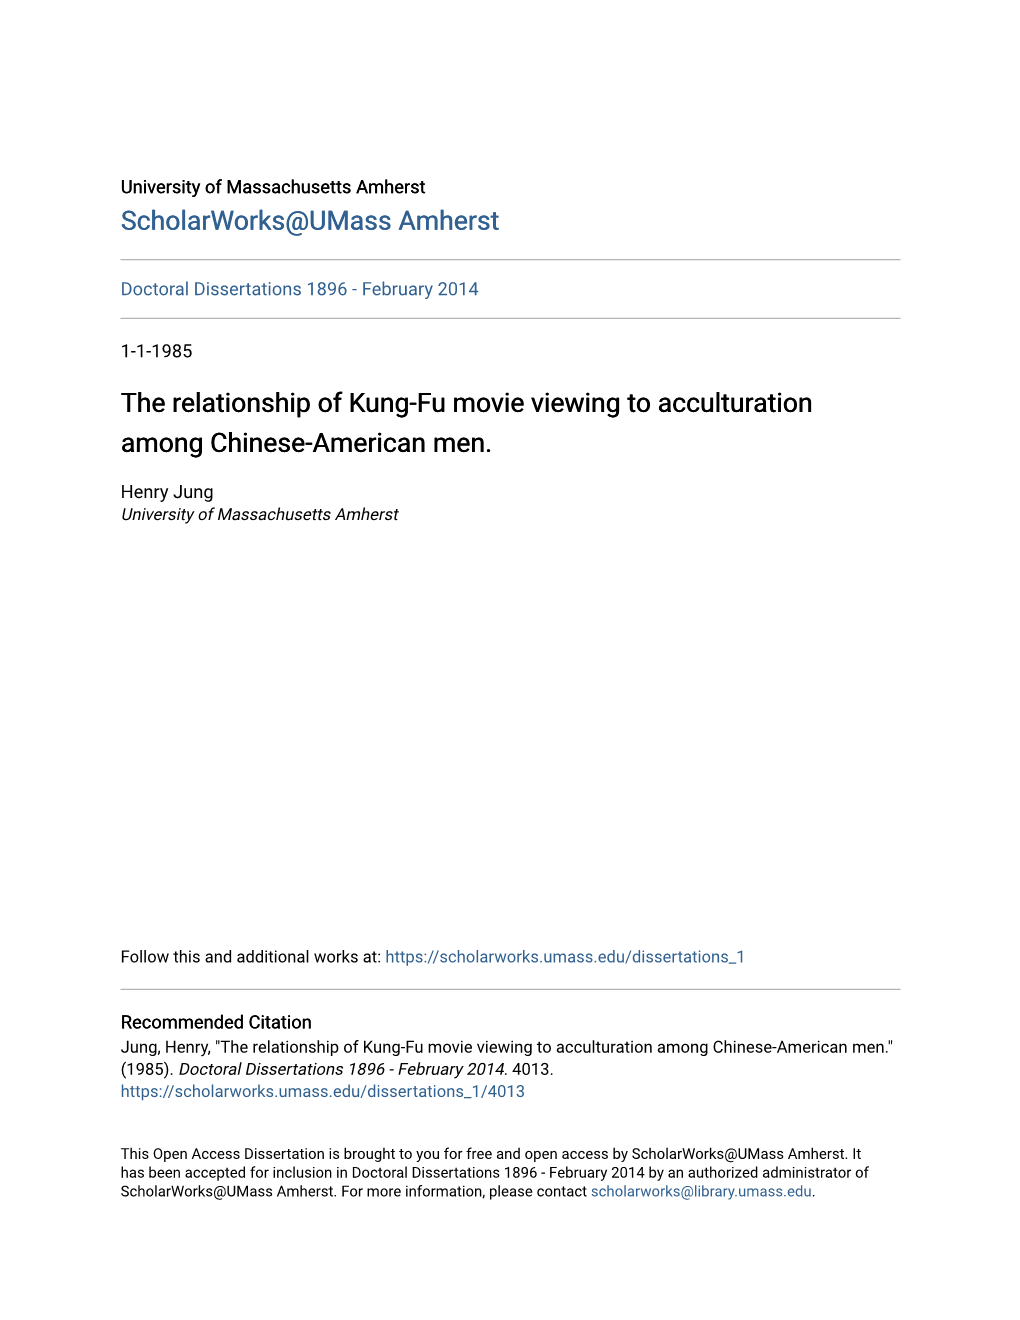 The Relationship of Kung-Fu Movie Viewing to Acculturation Among Chinese-American Men